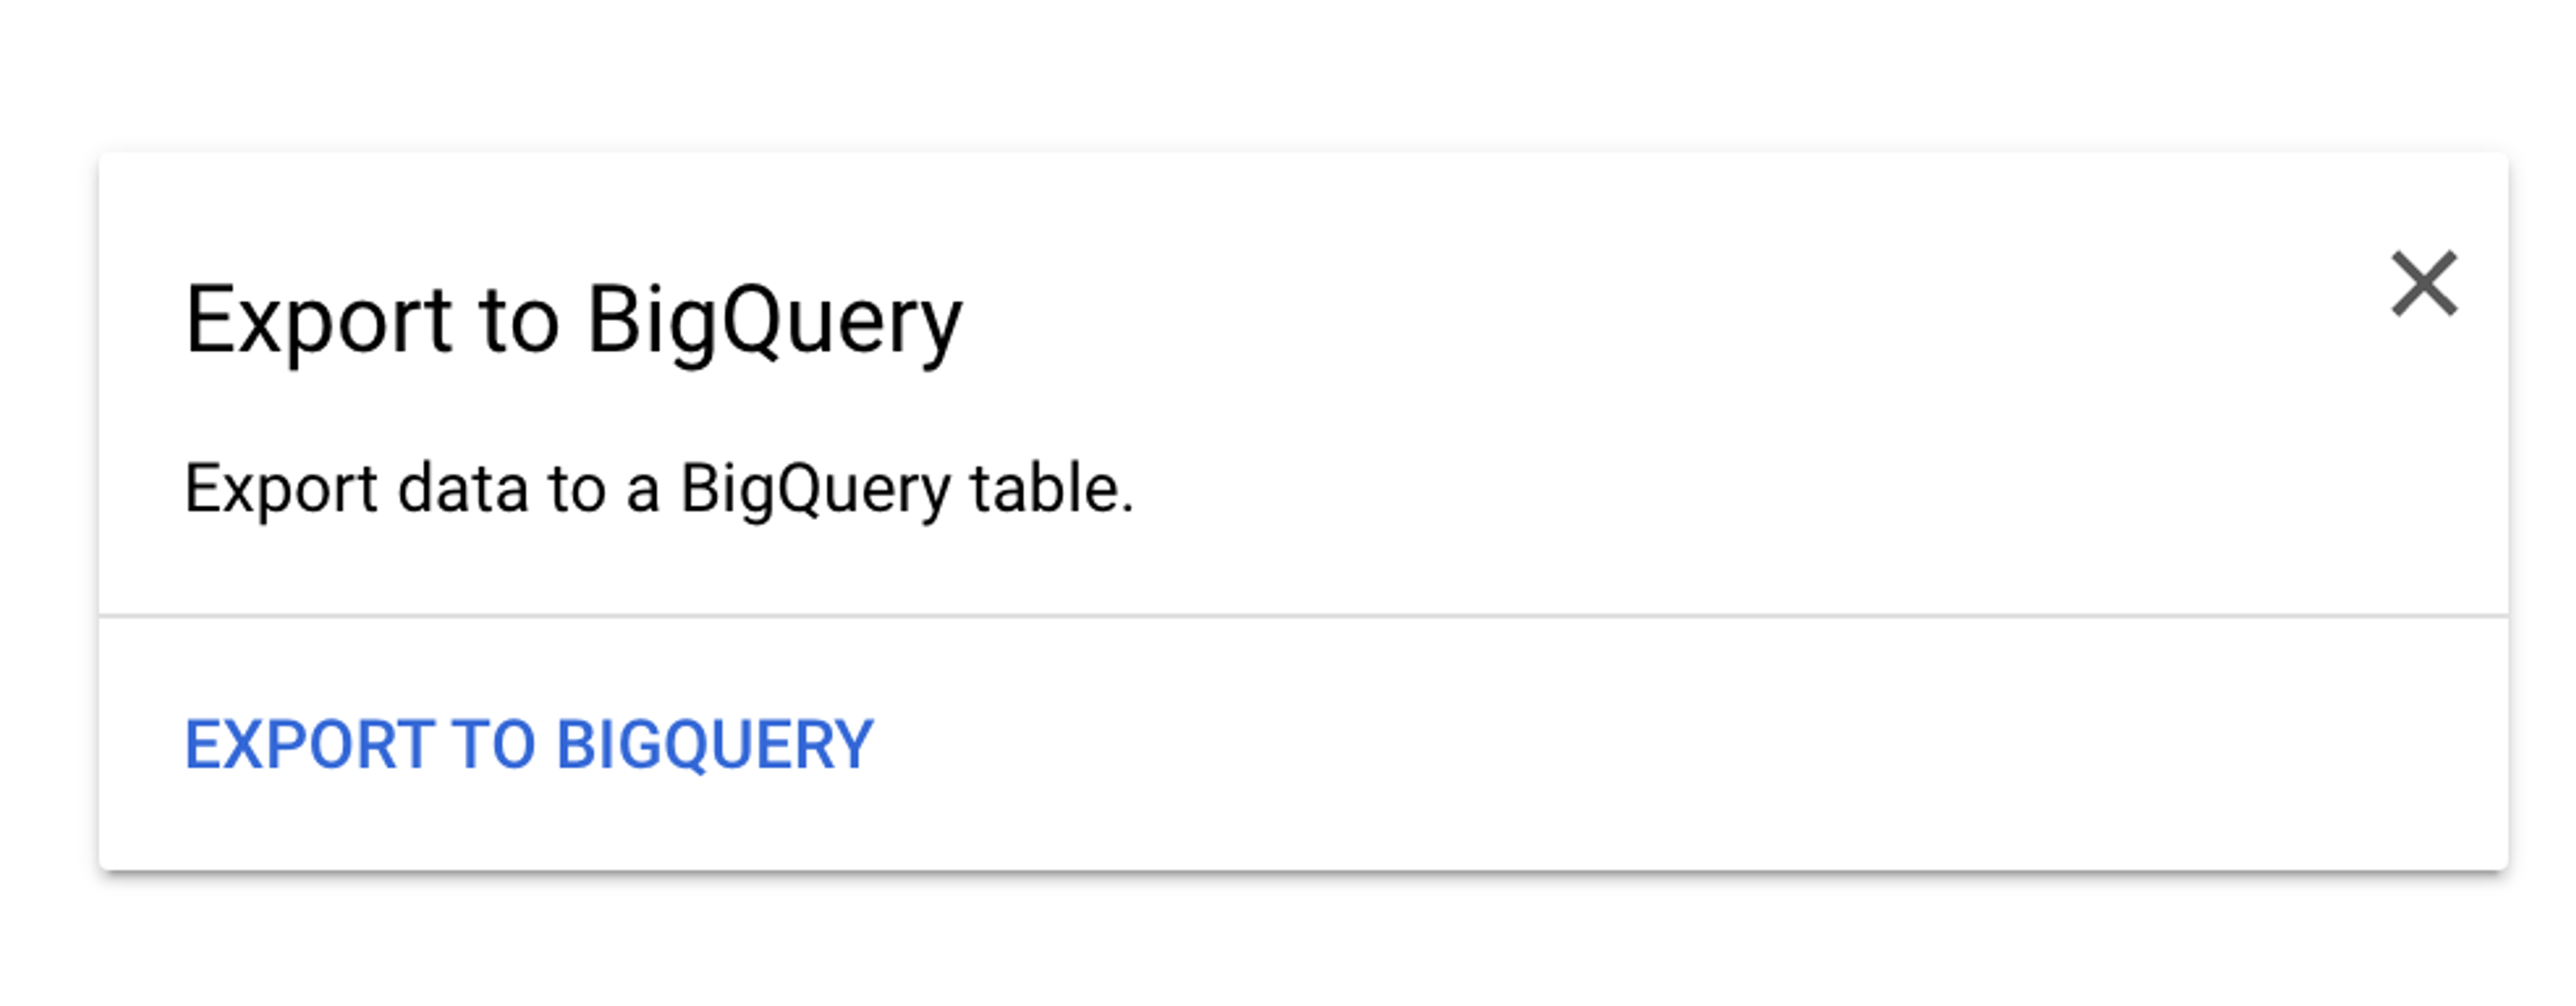 A screenshot of a section containing a button labeled "Export to BigQuery"